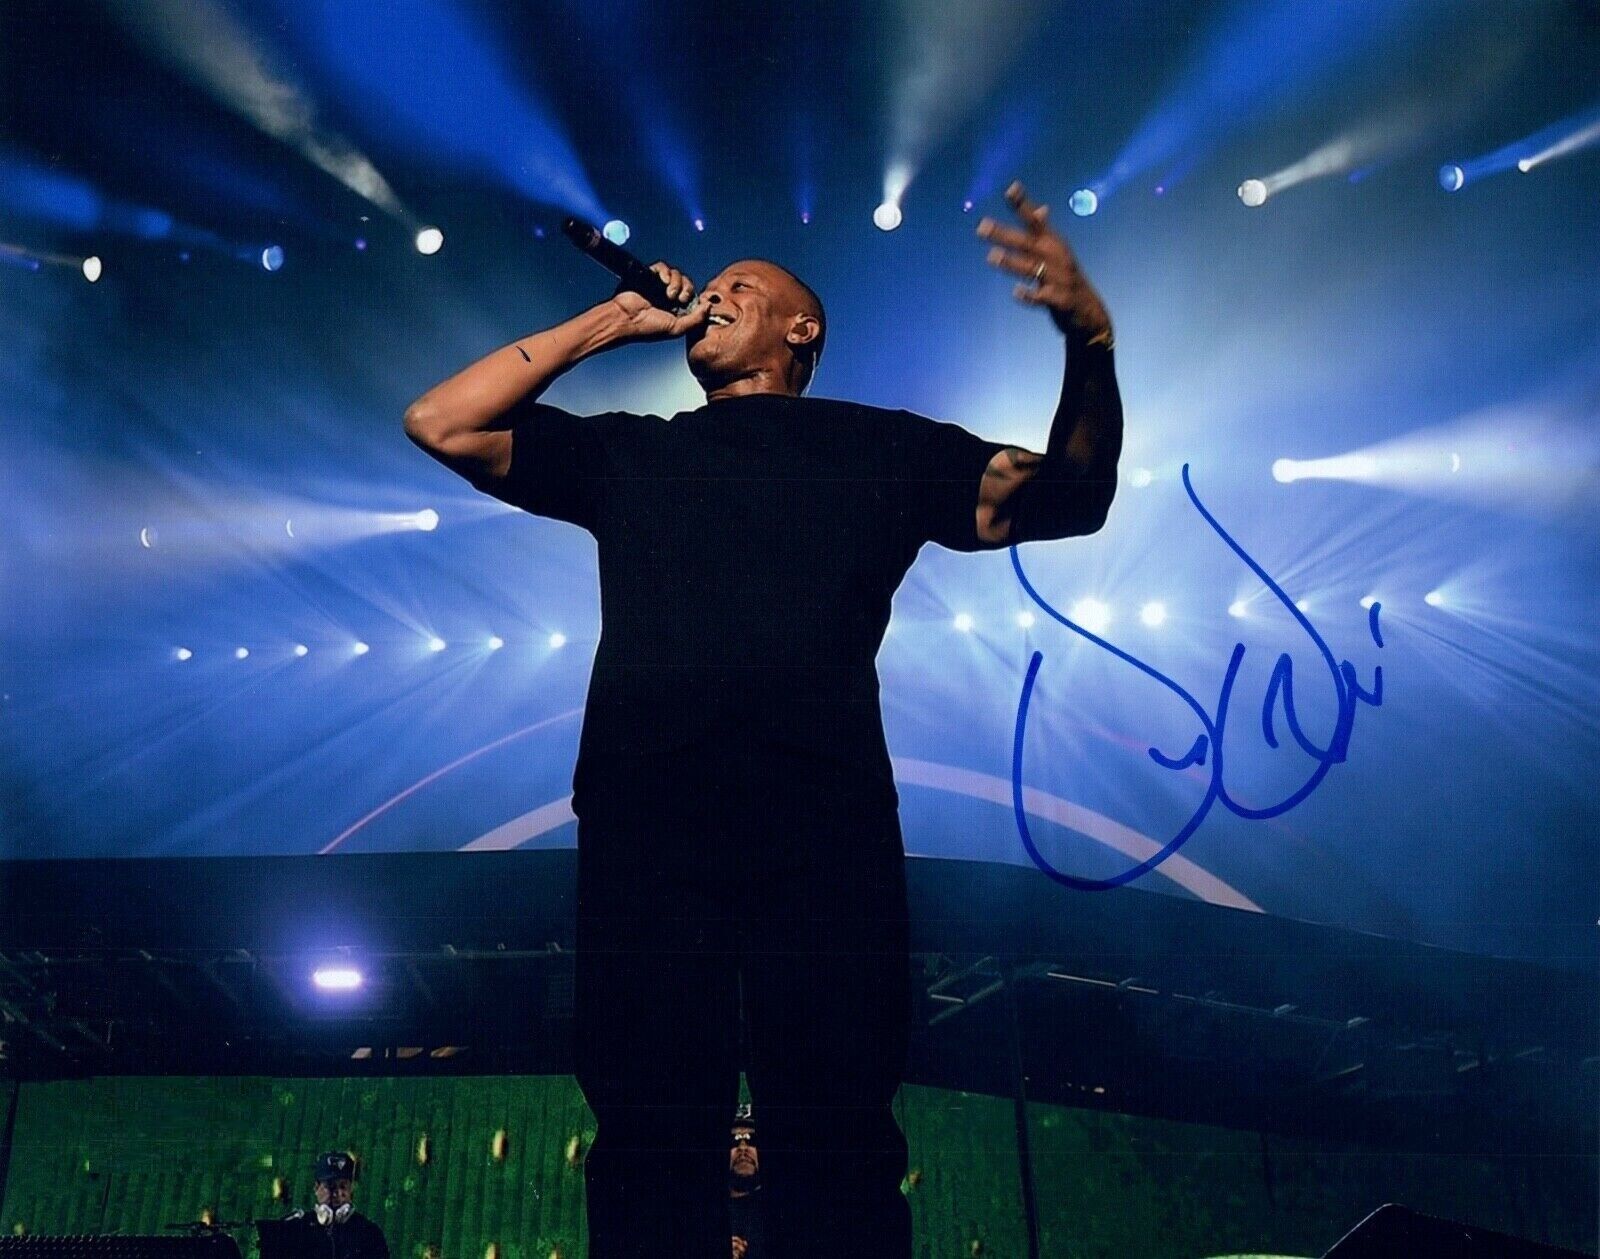 Dr Dre Autographed Signed 8x10 Photo Poster painting REPRINT